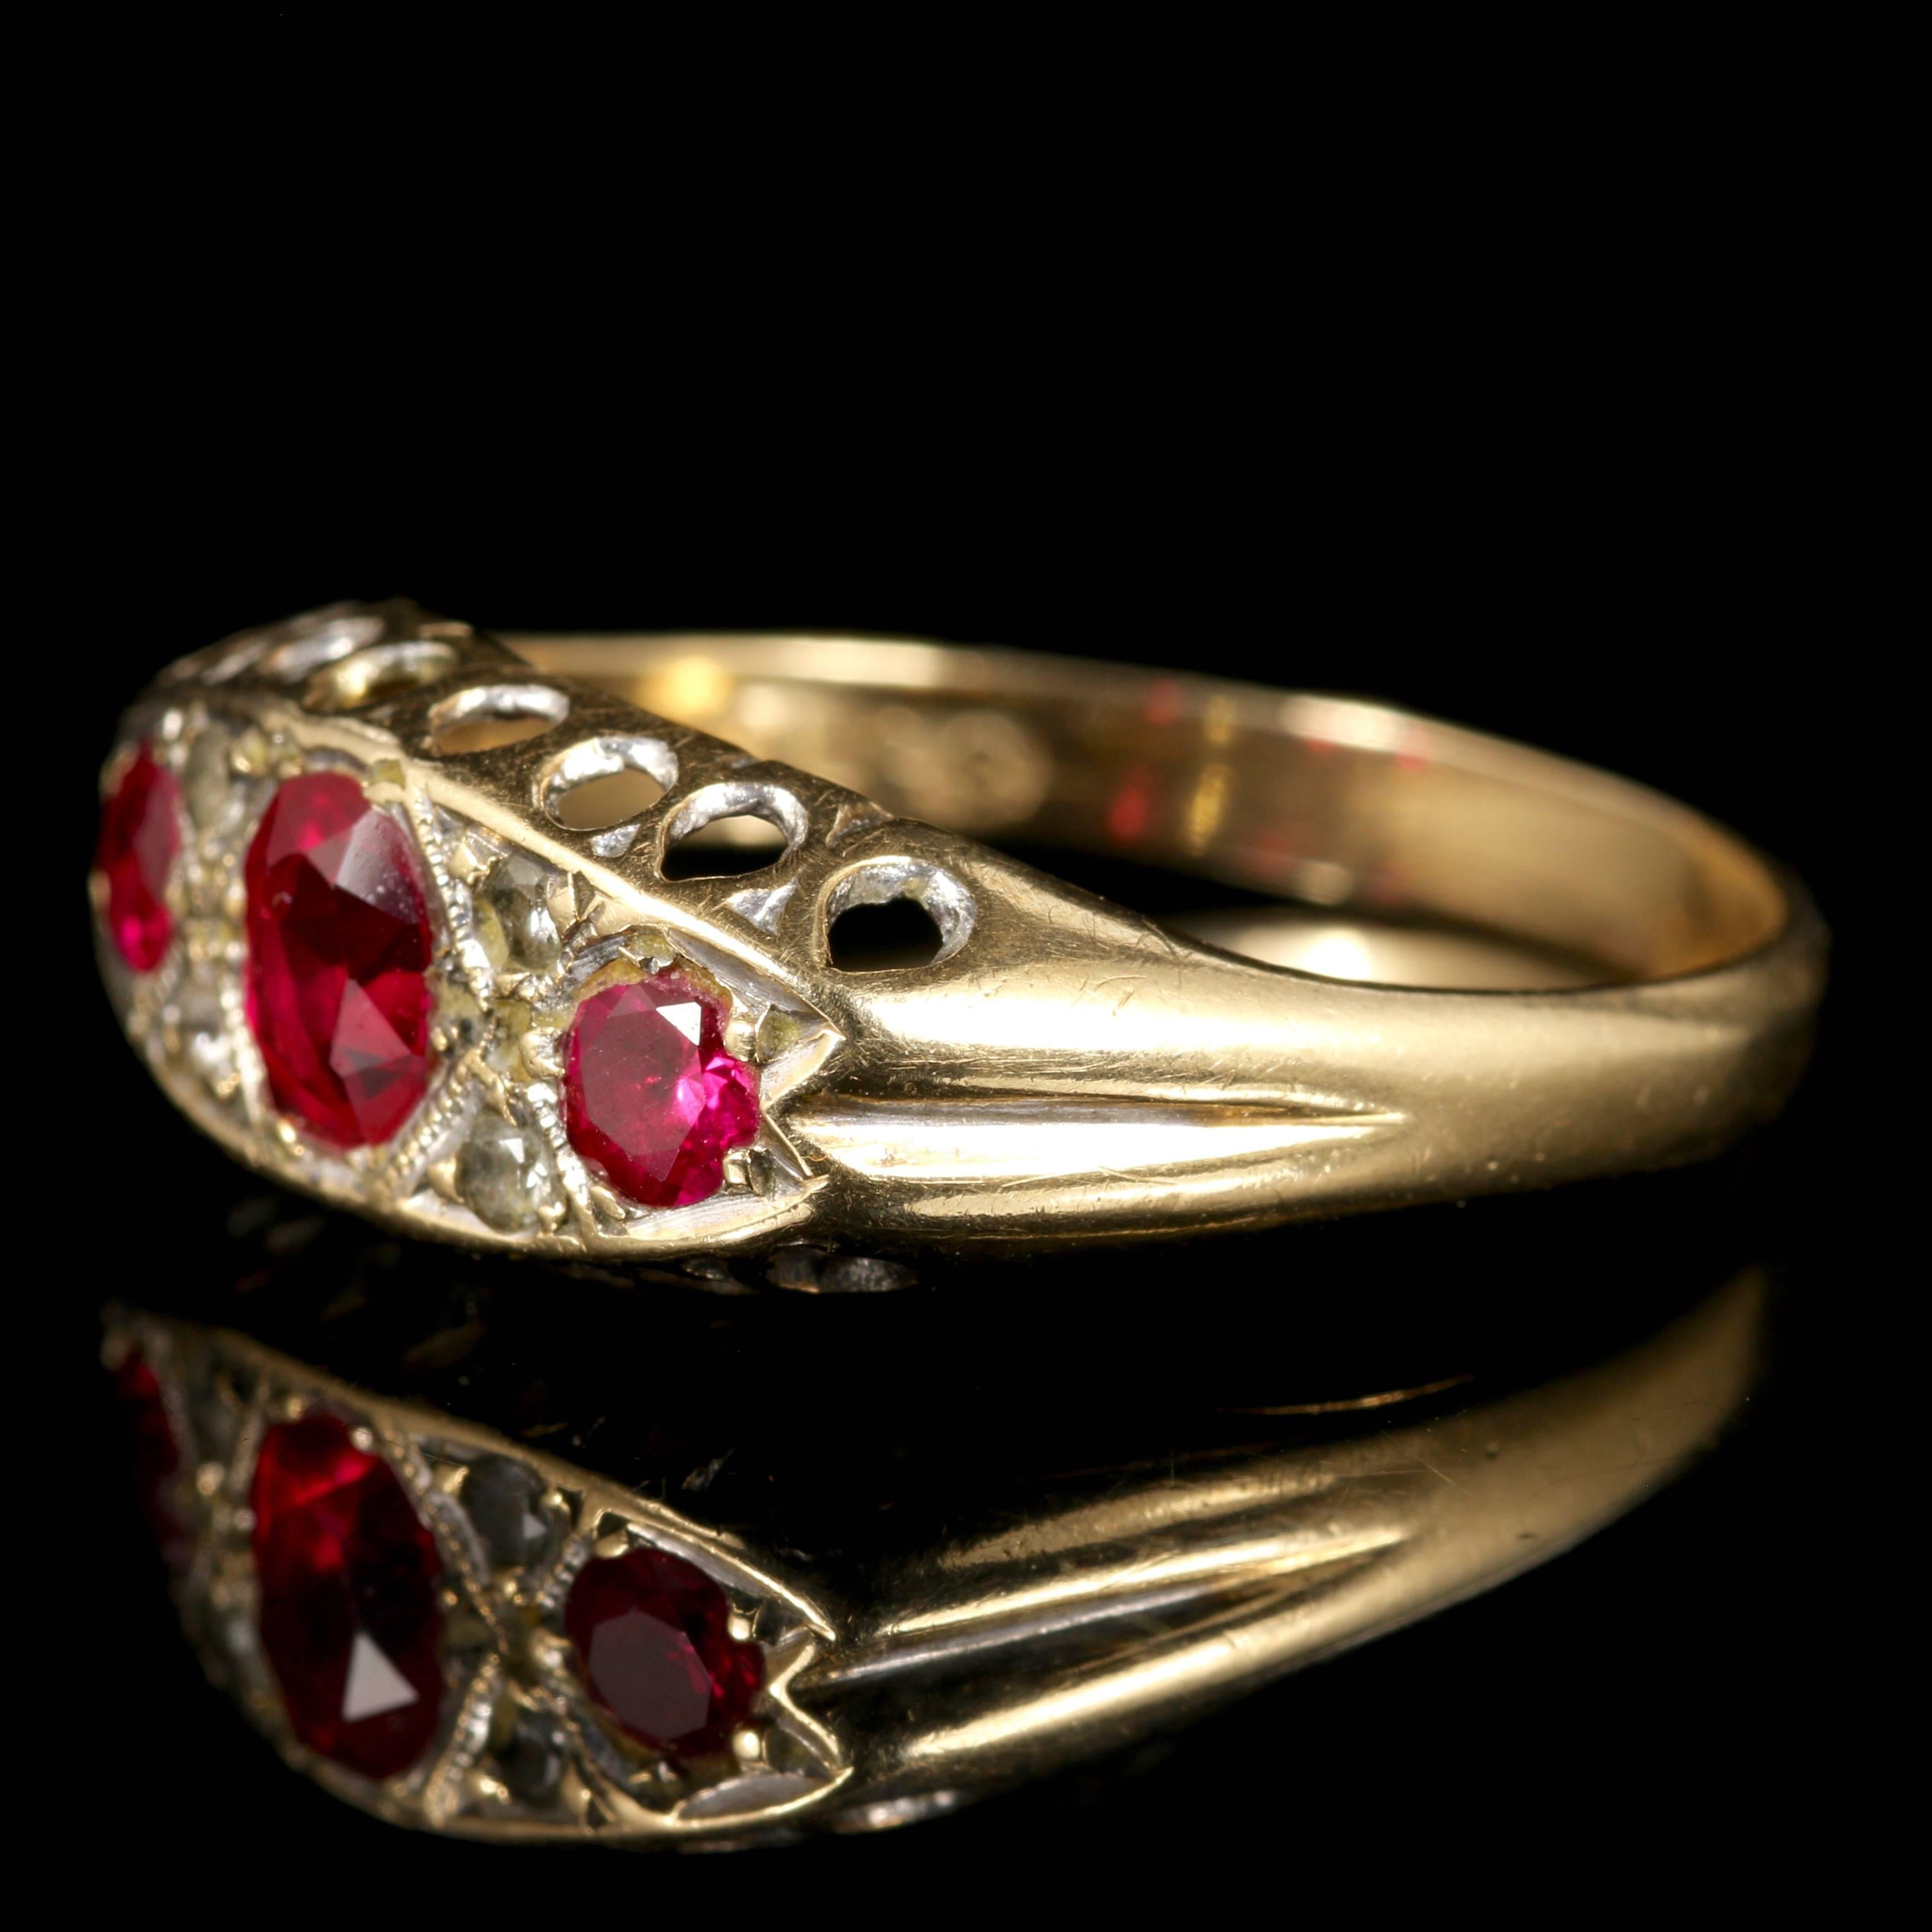 This fabulous antique Edwardian 9ct Yellow Gold ring is set with beautiful rich pink Rubies and Diamonds.

Fully hallmarked Chester 1909, 9ct Gold.

Three beautiful Rubies are set into the Edwardian gallery complimented by sparkling Diamonds.

The